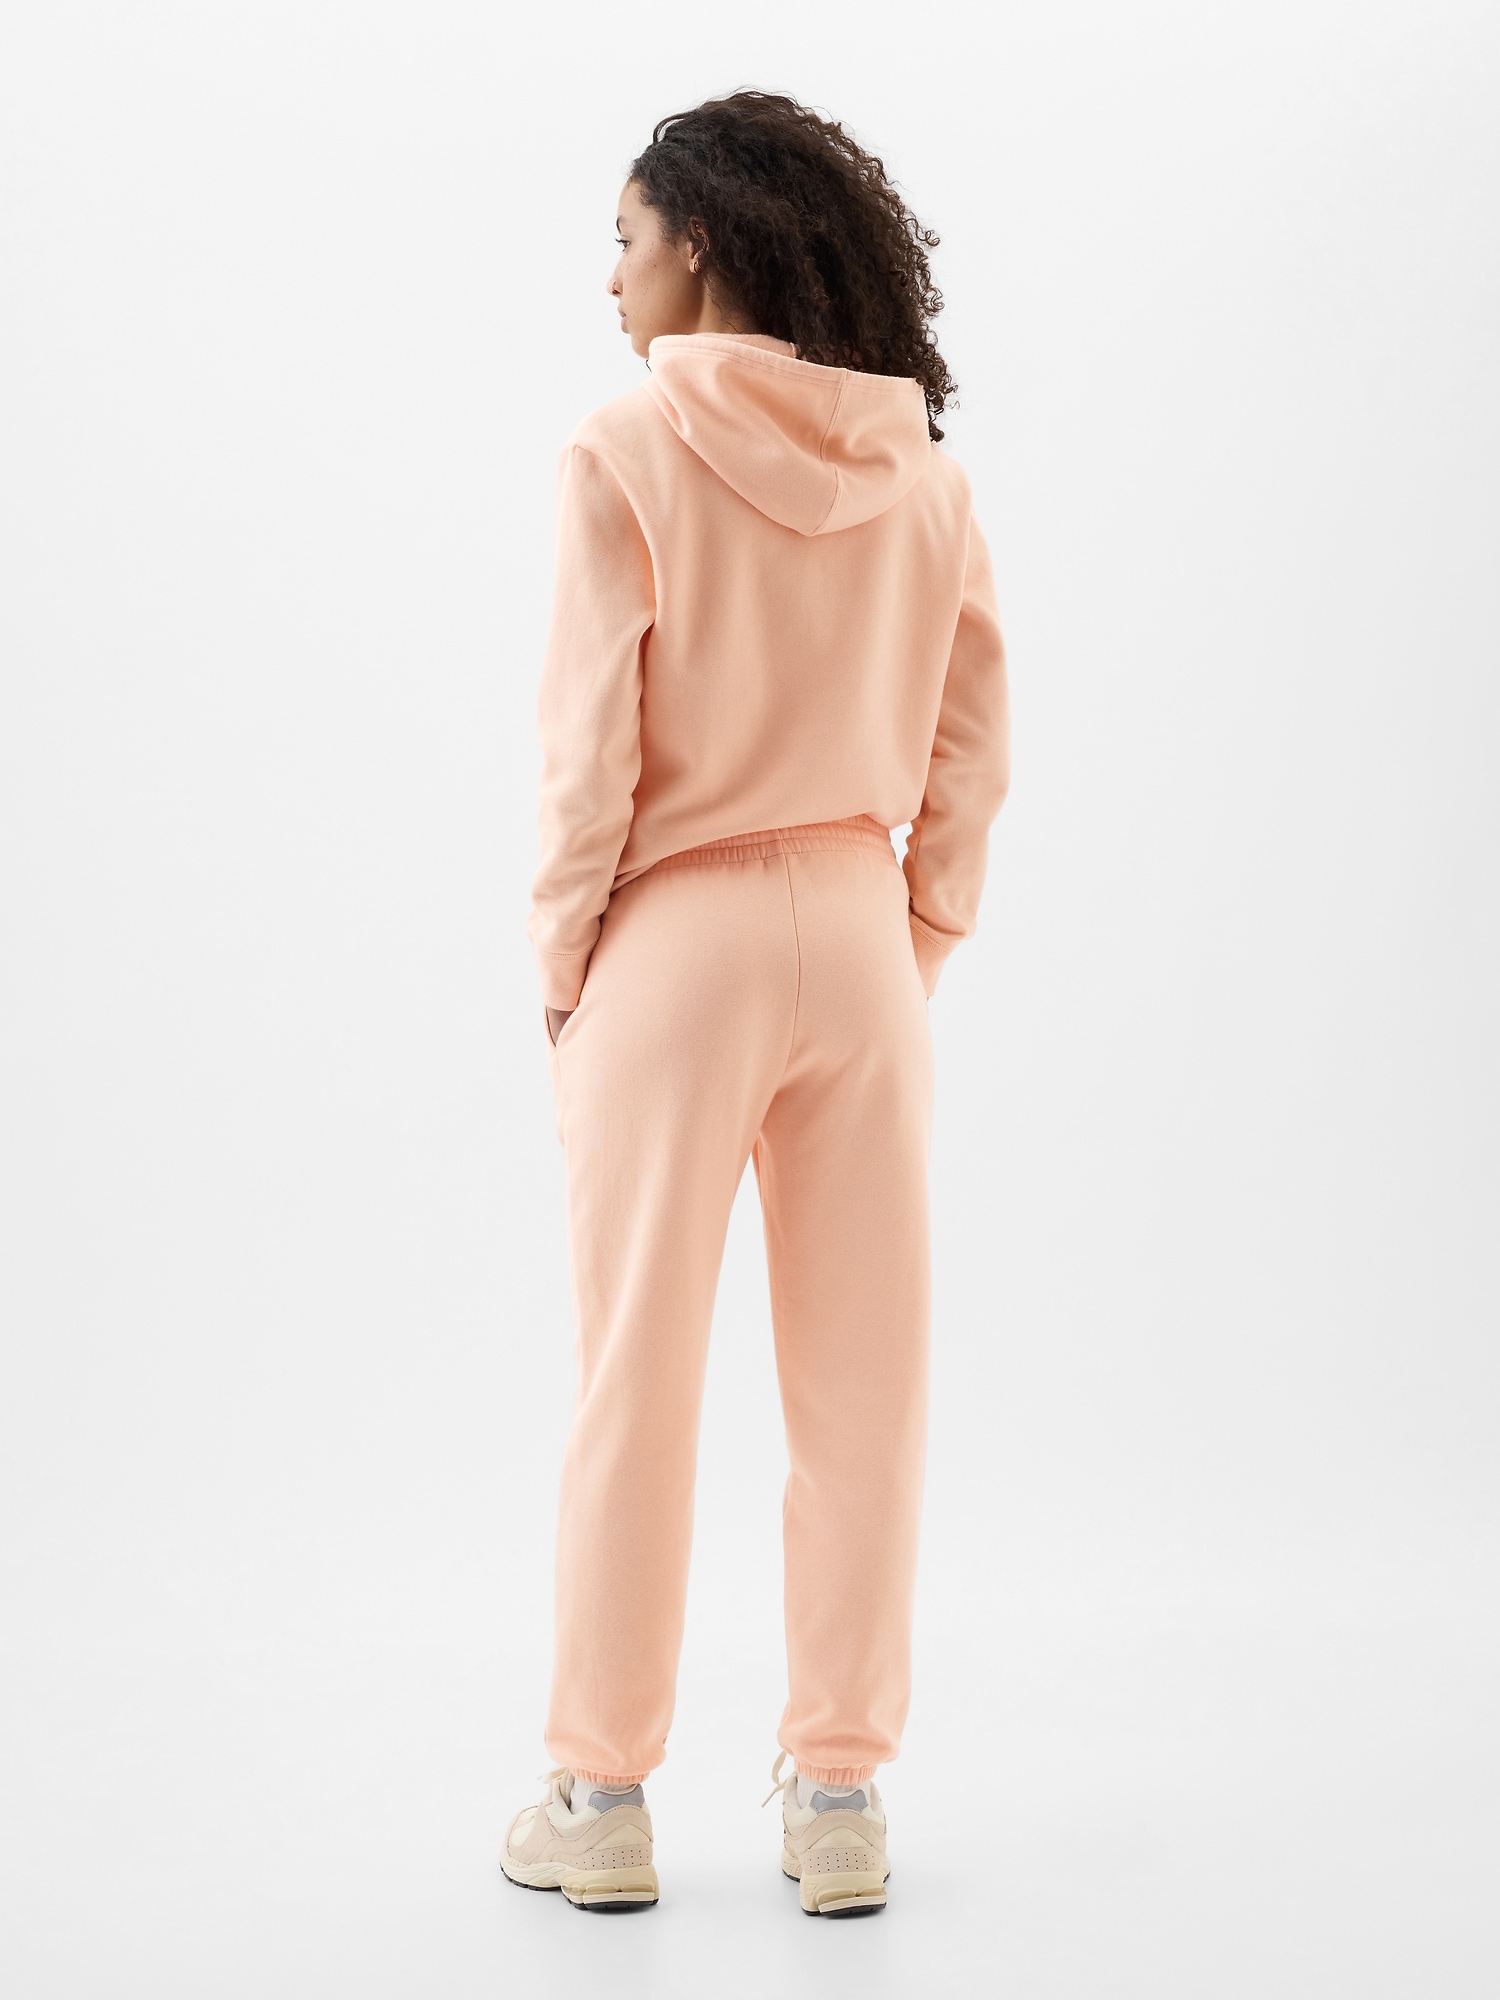 Gap Jogger Athletic Sweatsuits for Women